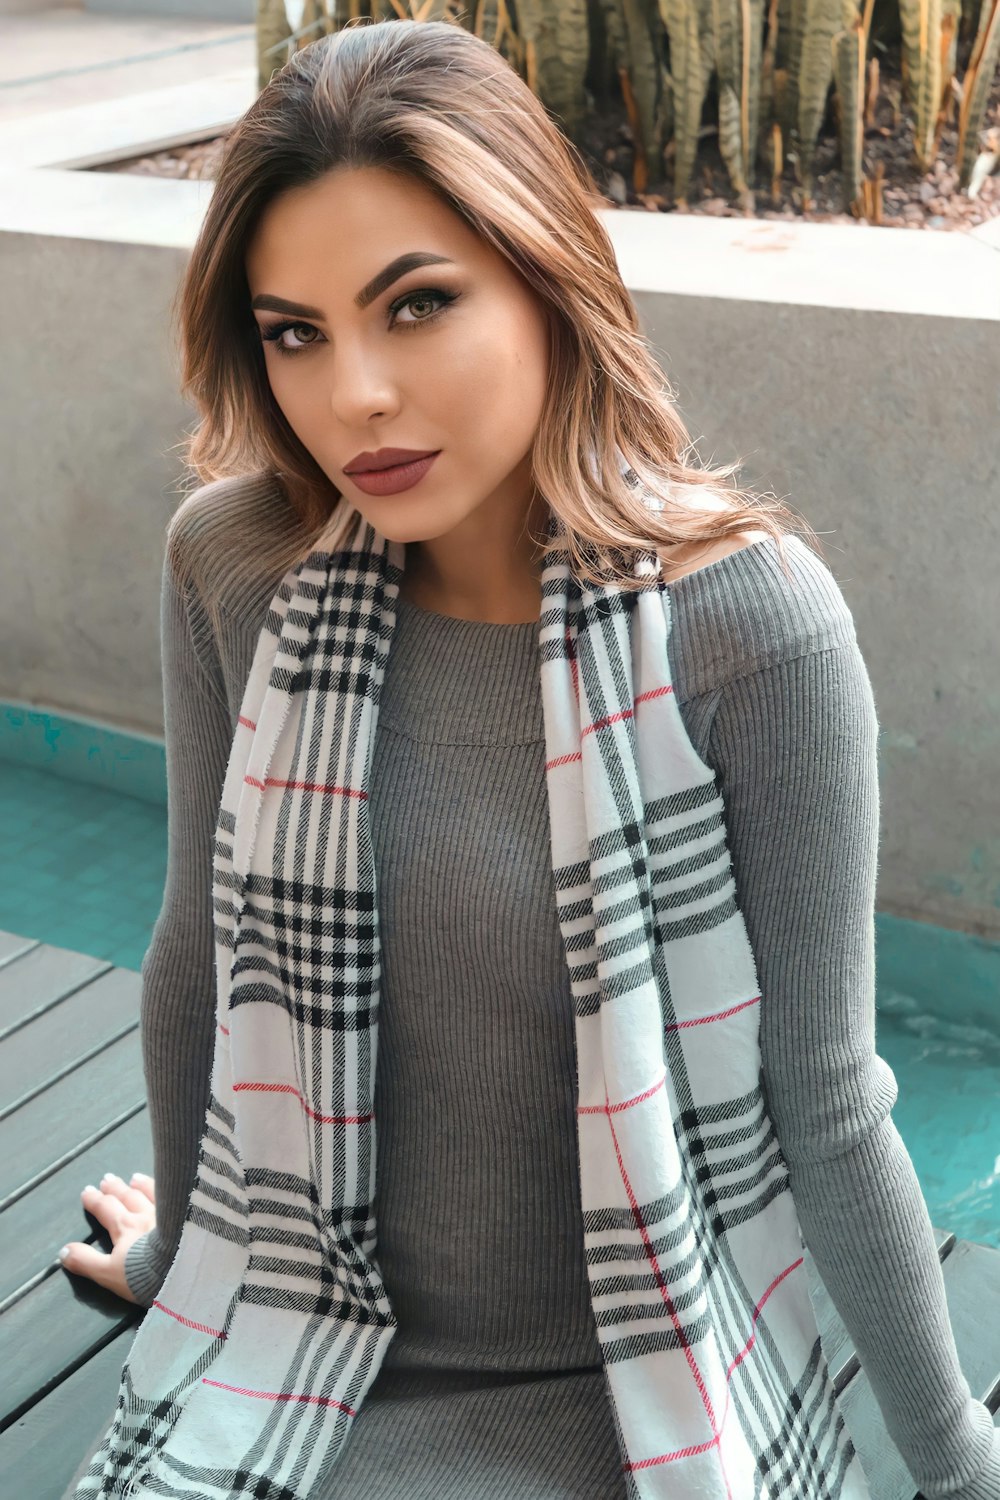 woman in gray cardigan and red white and black plaid scarf